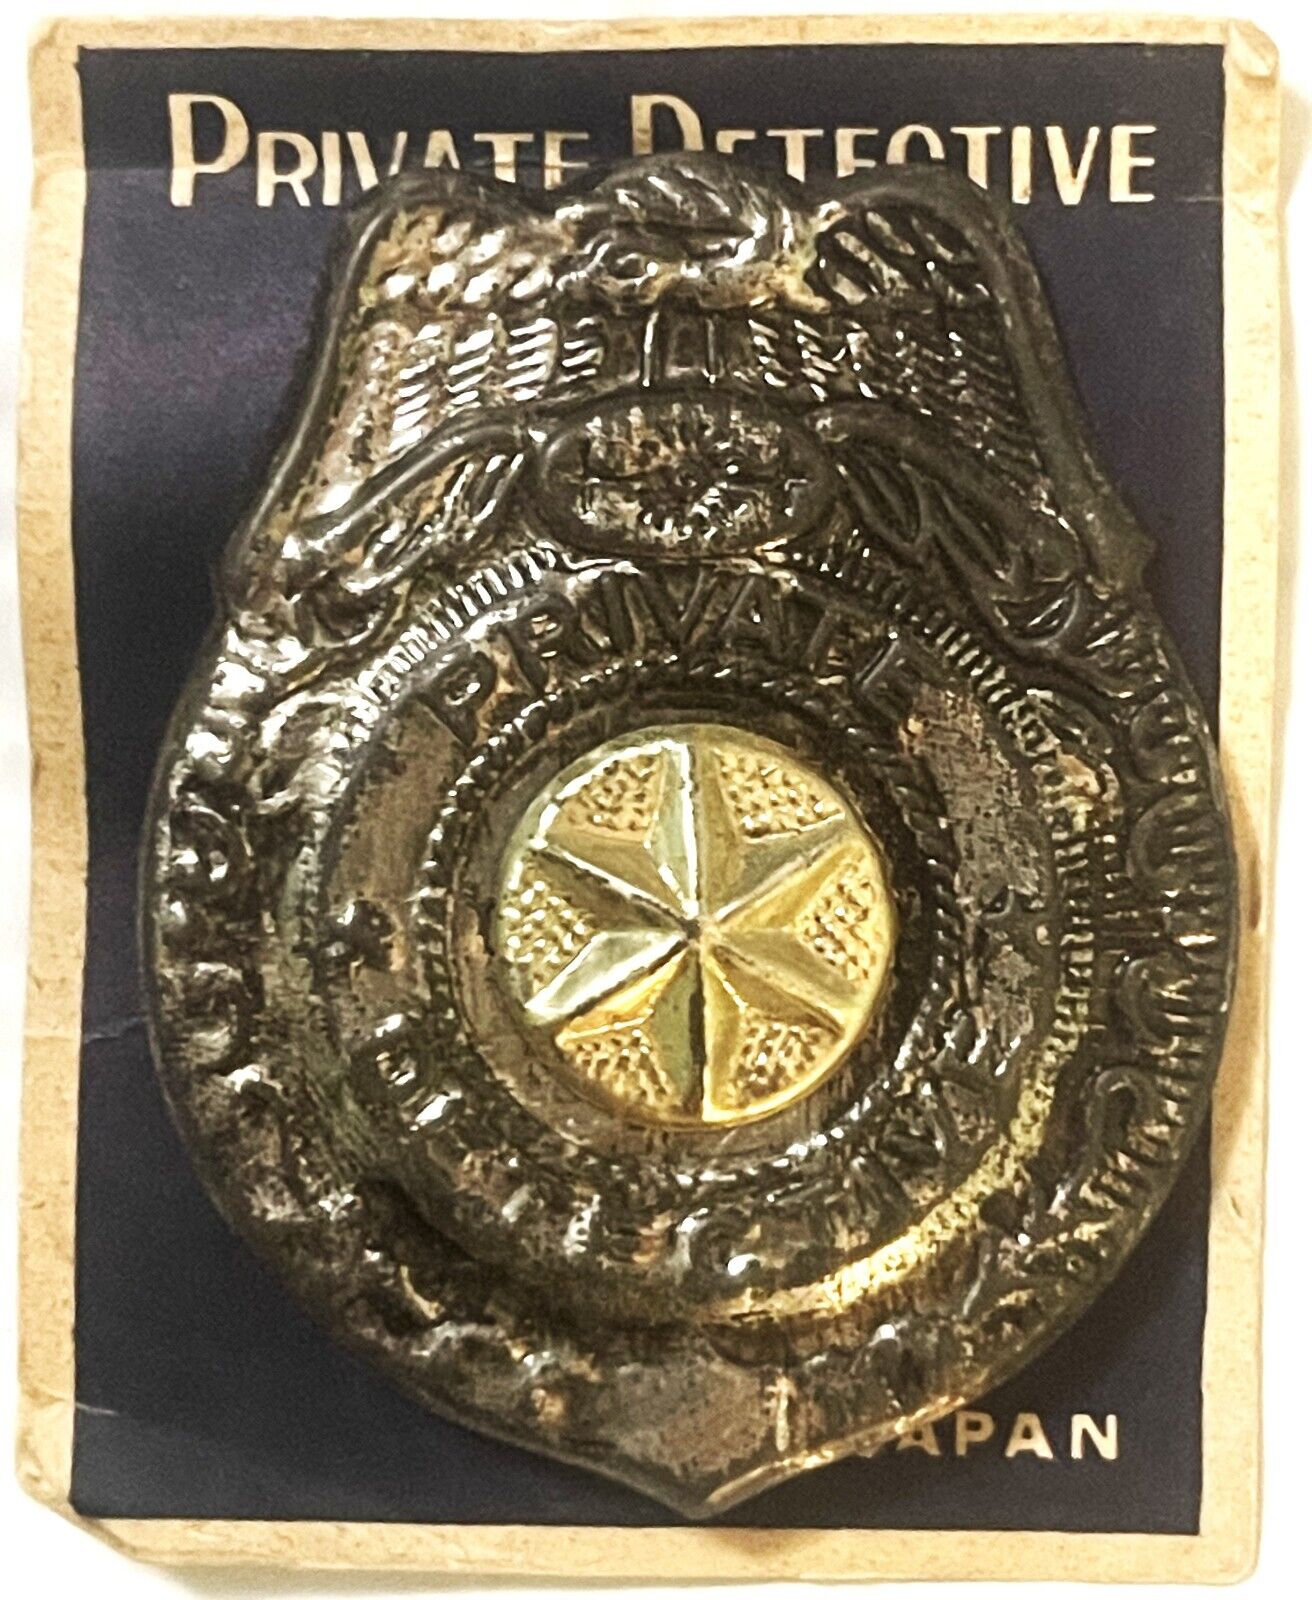 Vintage 1950s Tin Special Police - Private Detective Badge on Original Card